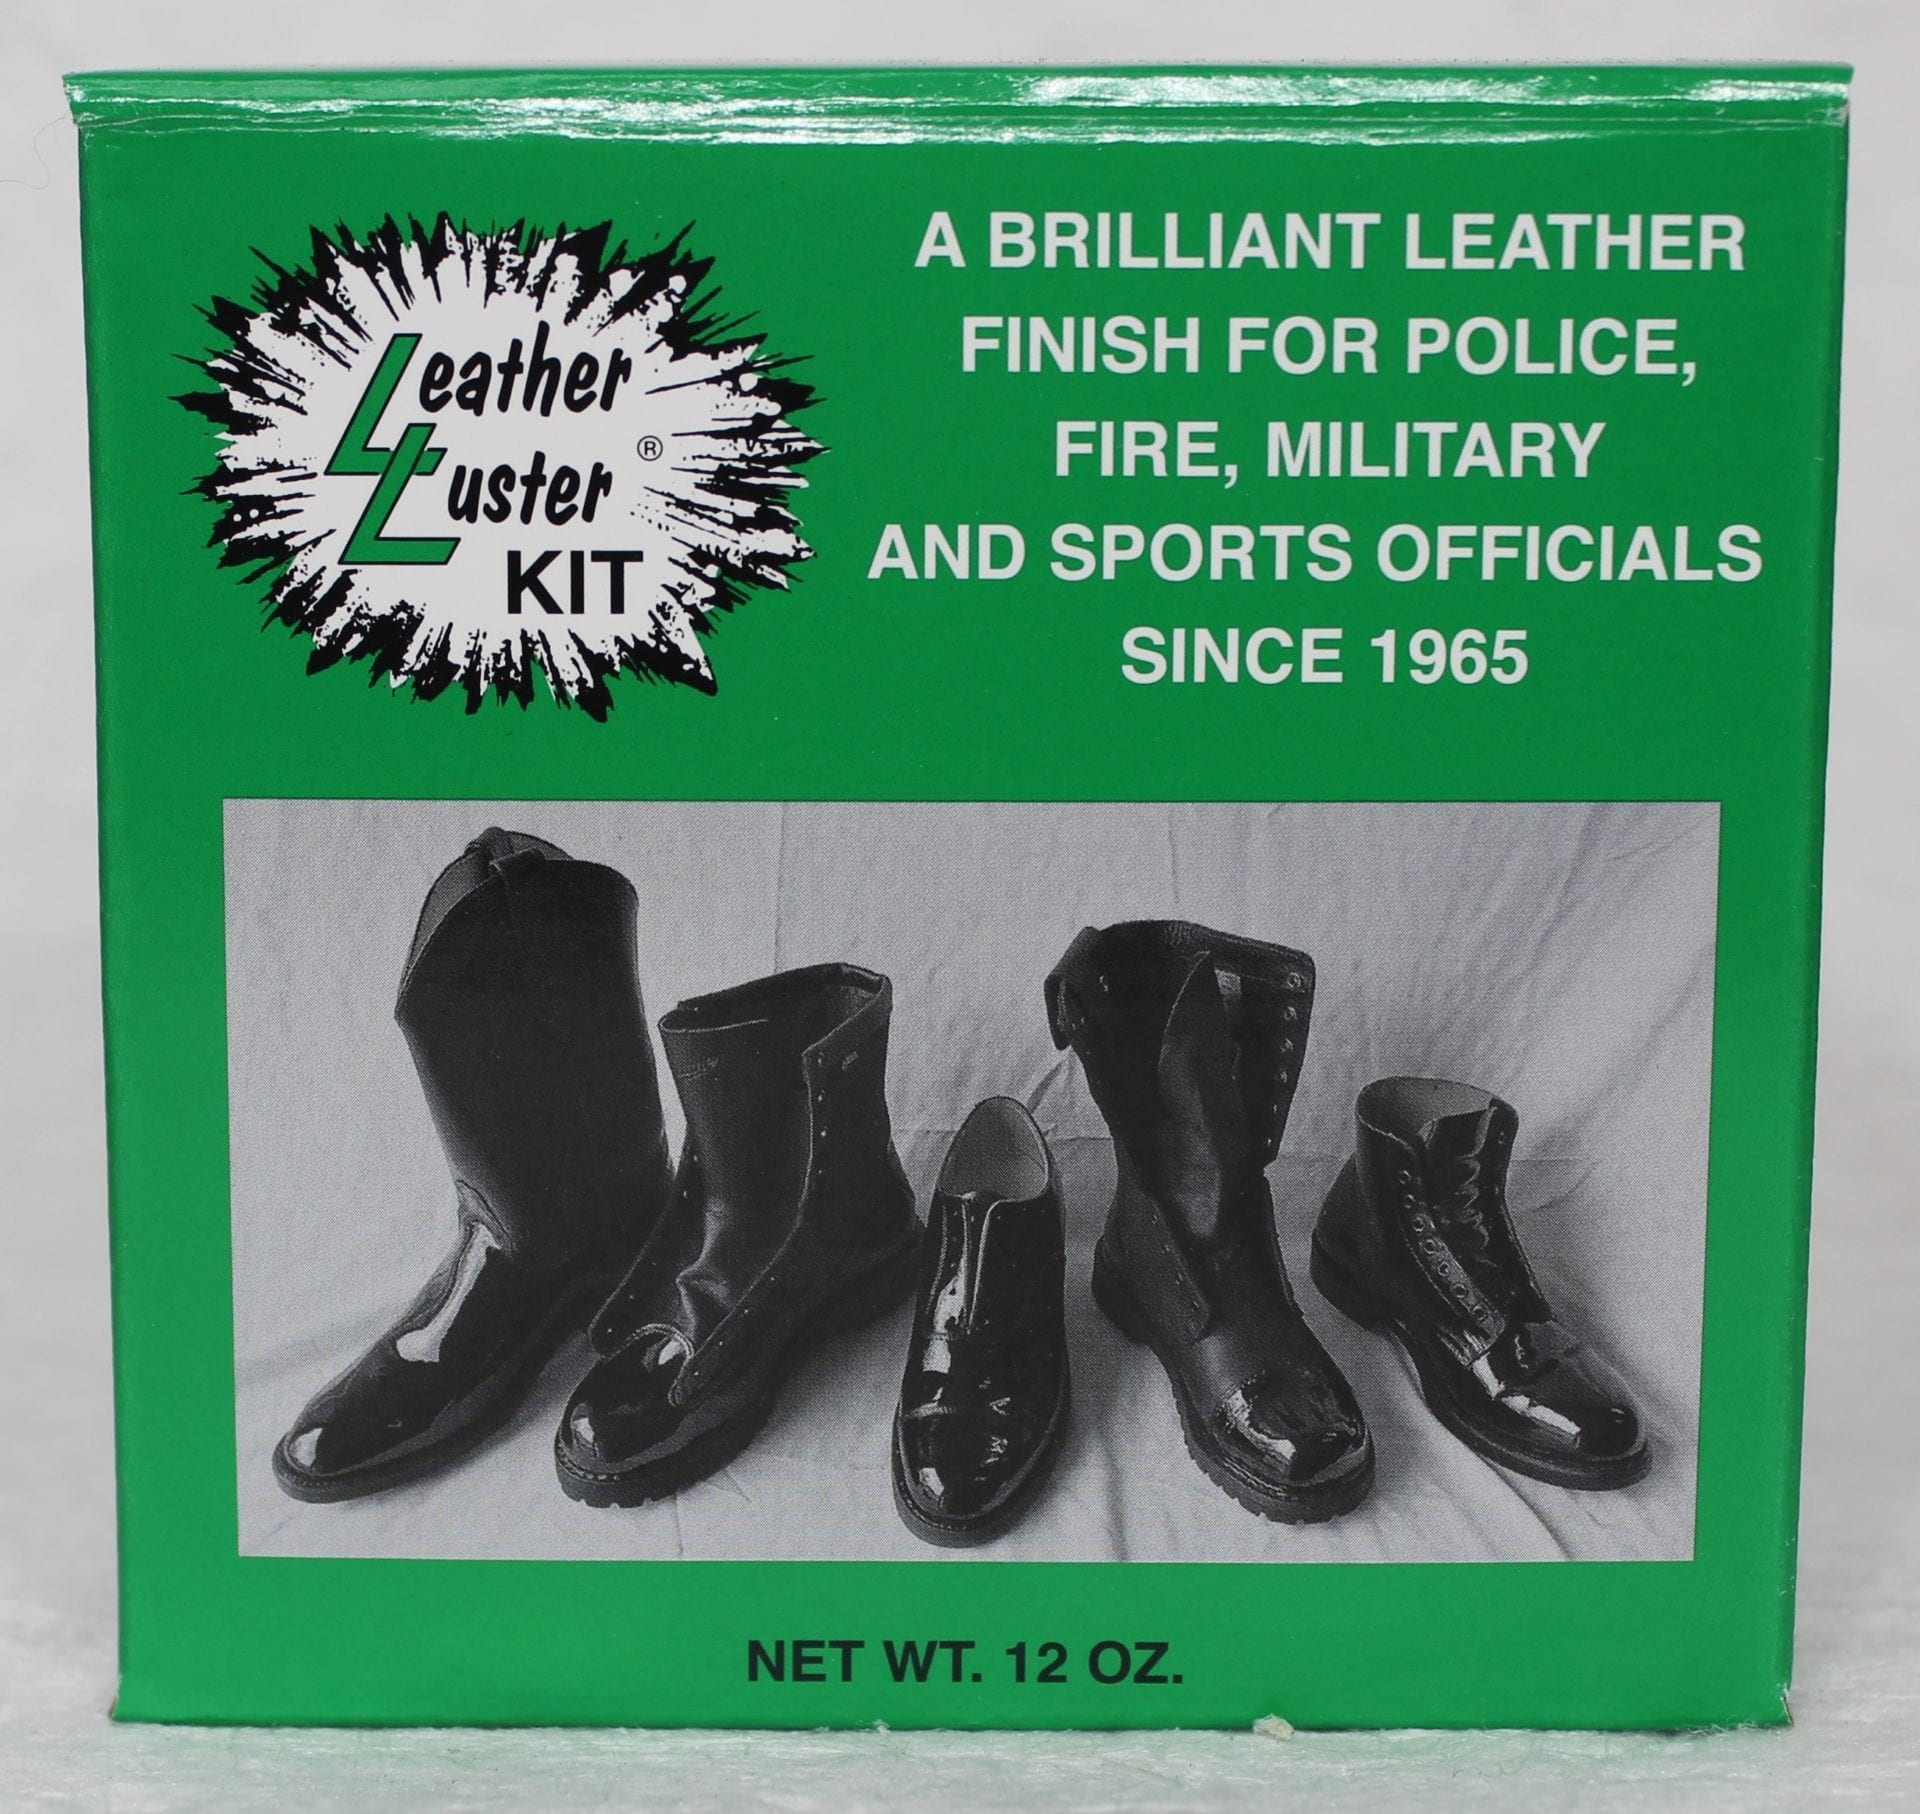 Military Boot Polish Leather Military Boots Leather Luster polish Boot Care Kit 